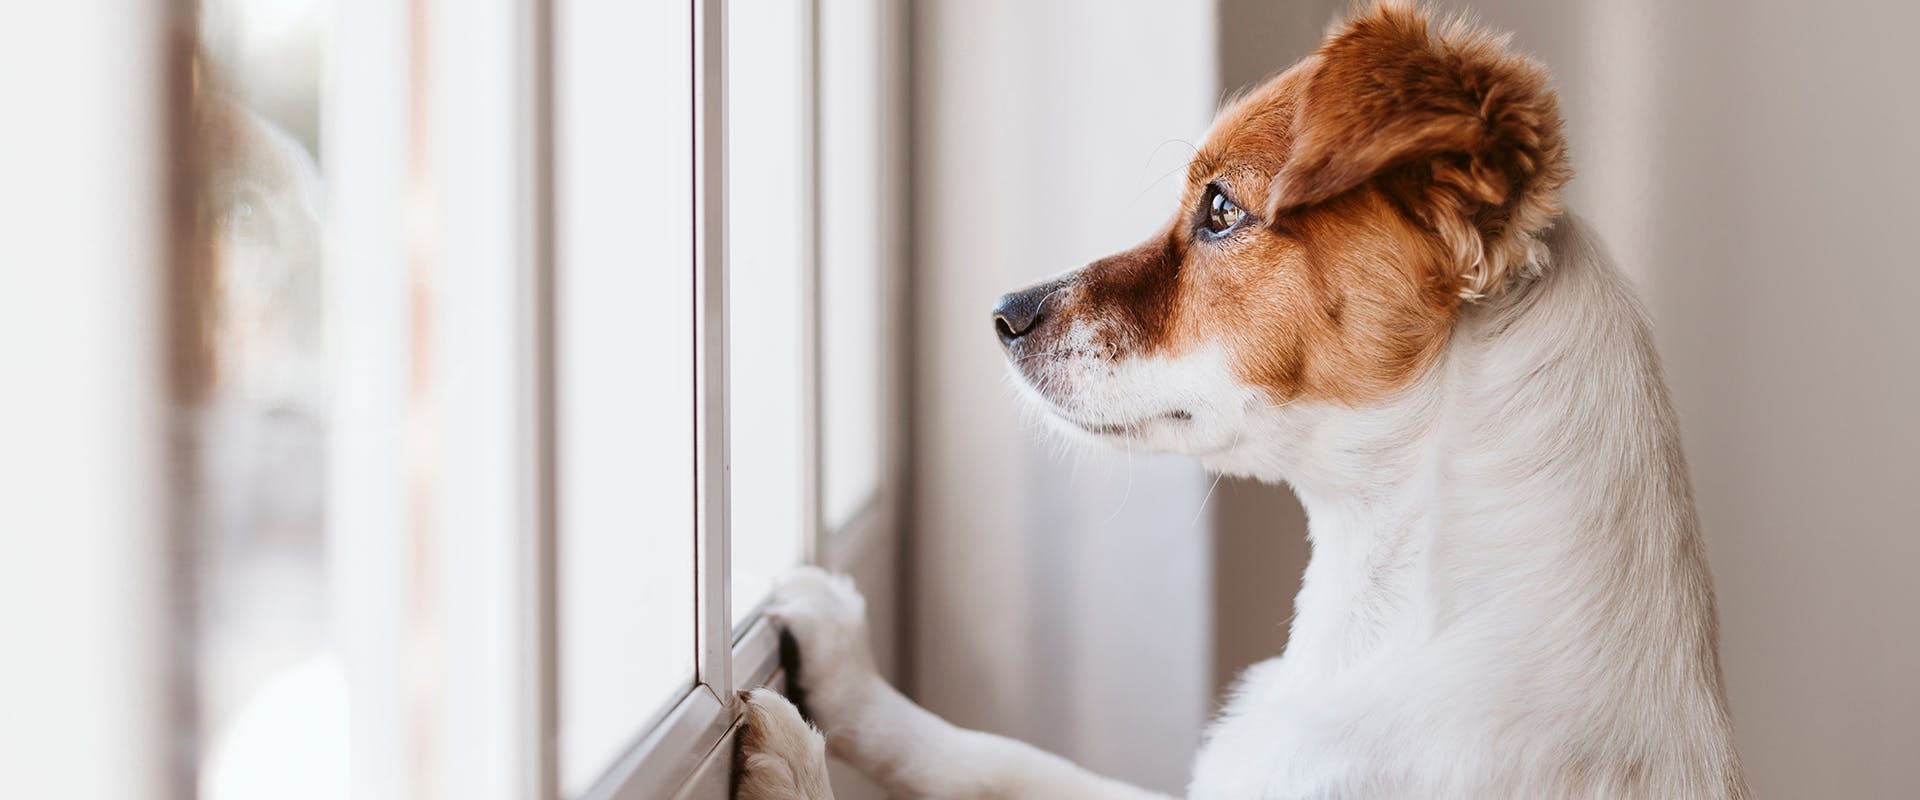 a dog, who has been left on its own, looking longing out of the window with its front paws on the windowsill